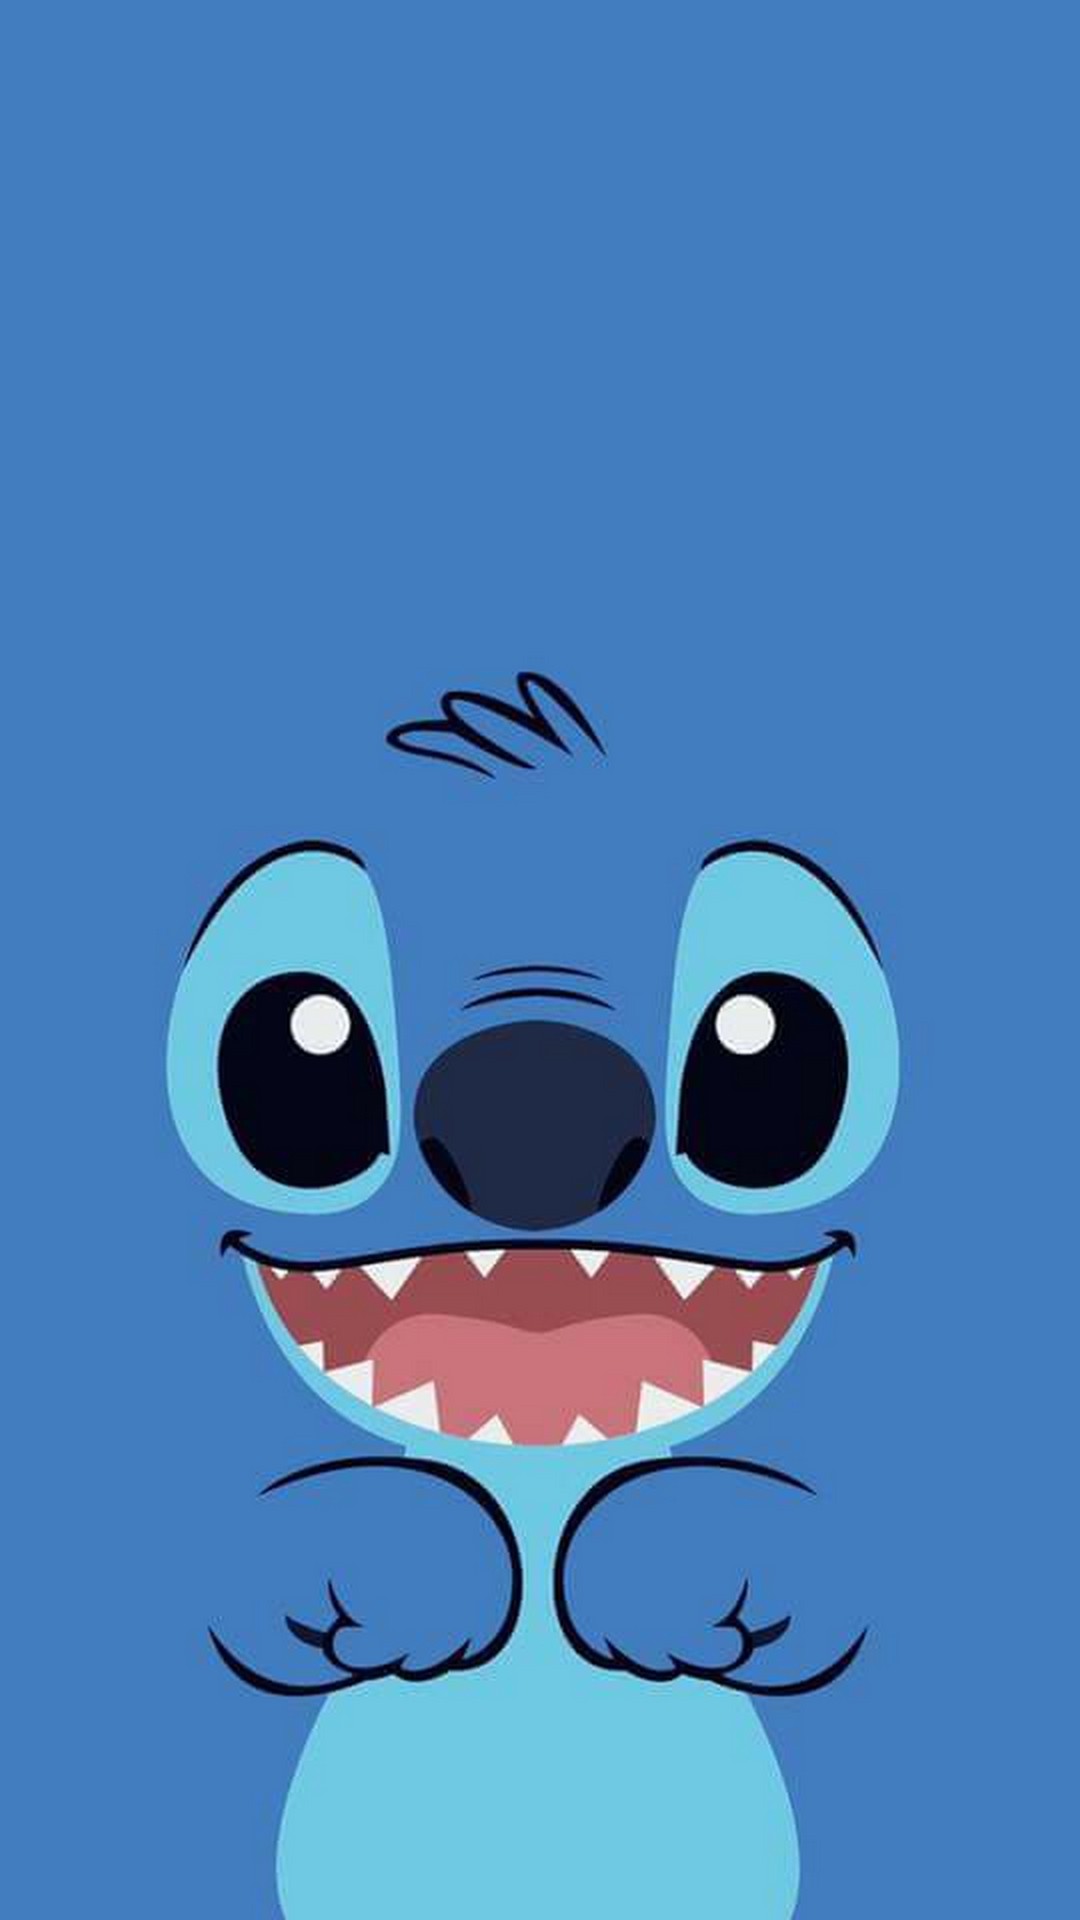 Stitch Disney Wallpaper For Mobile Android 1080x1920